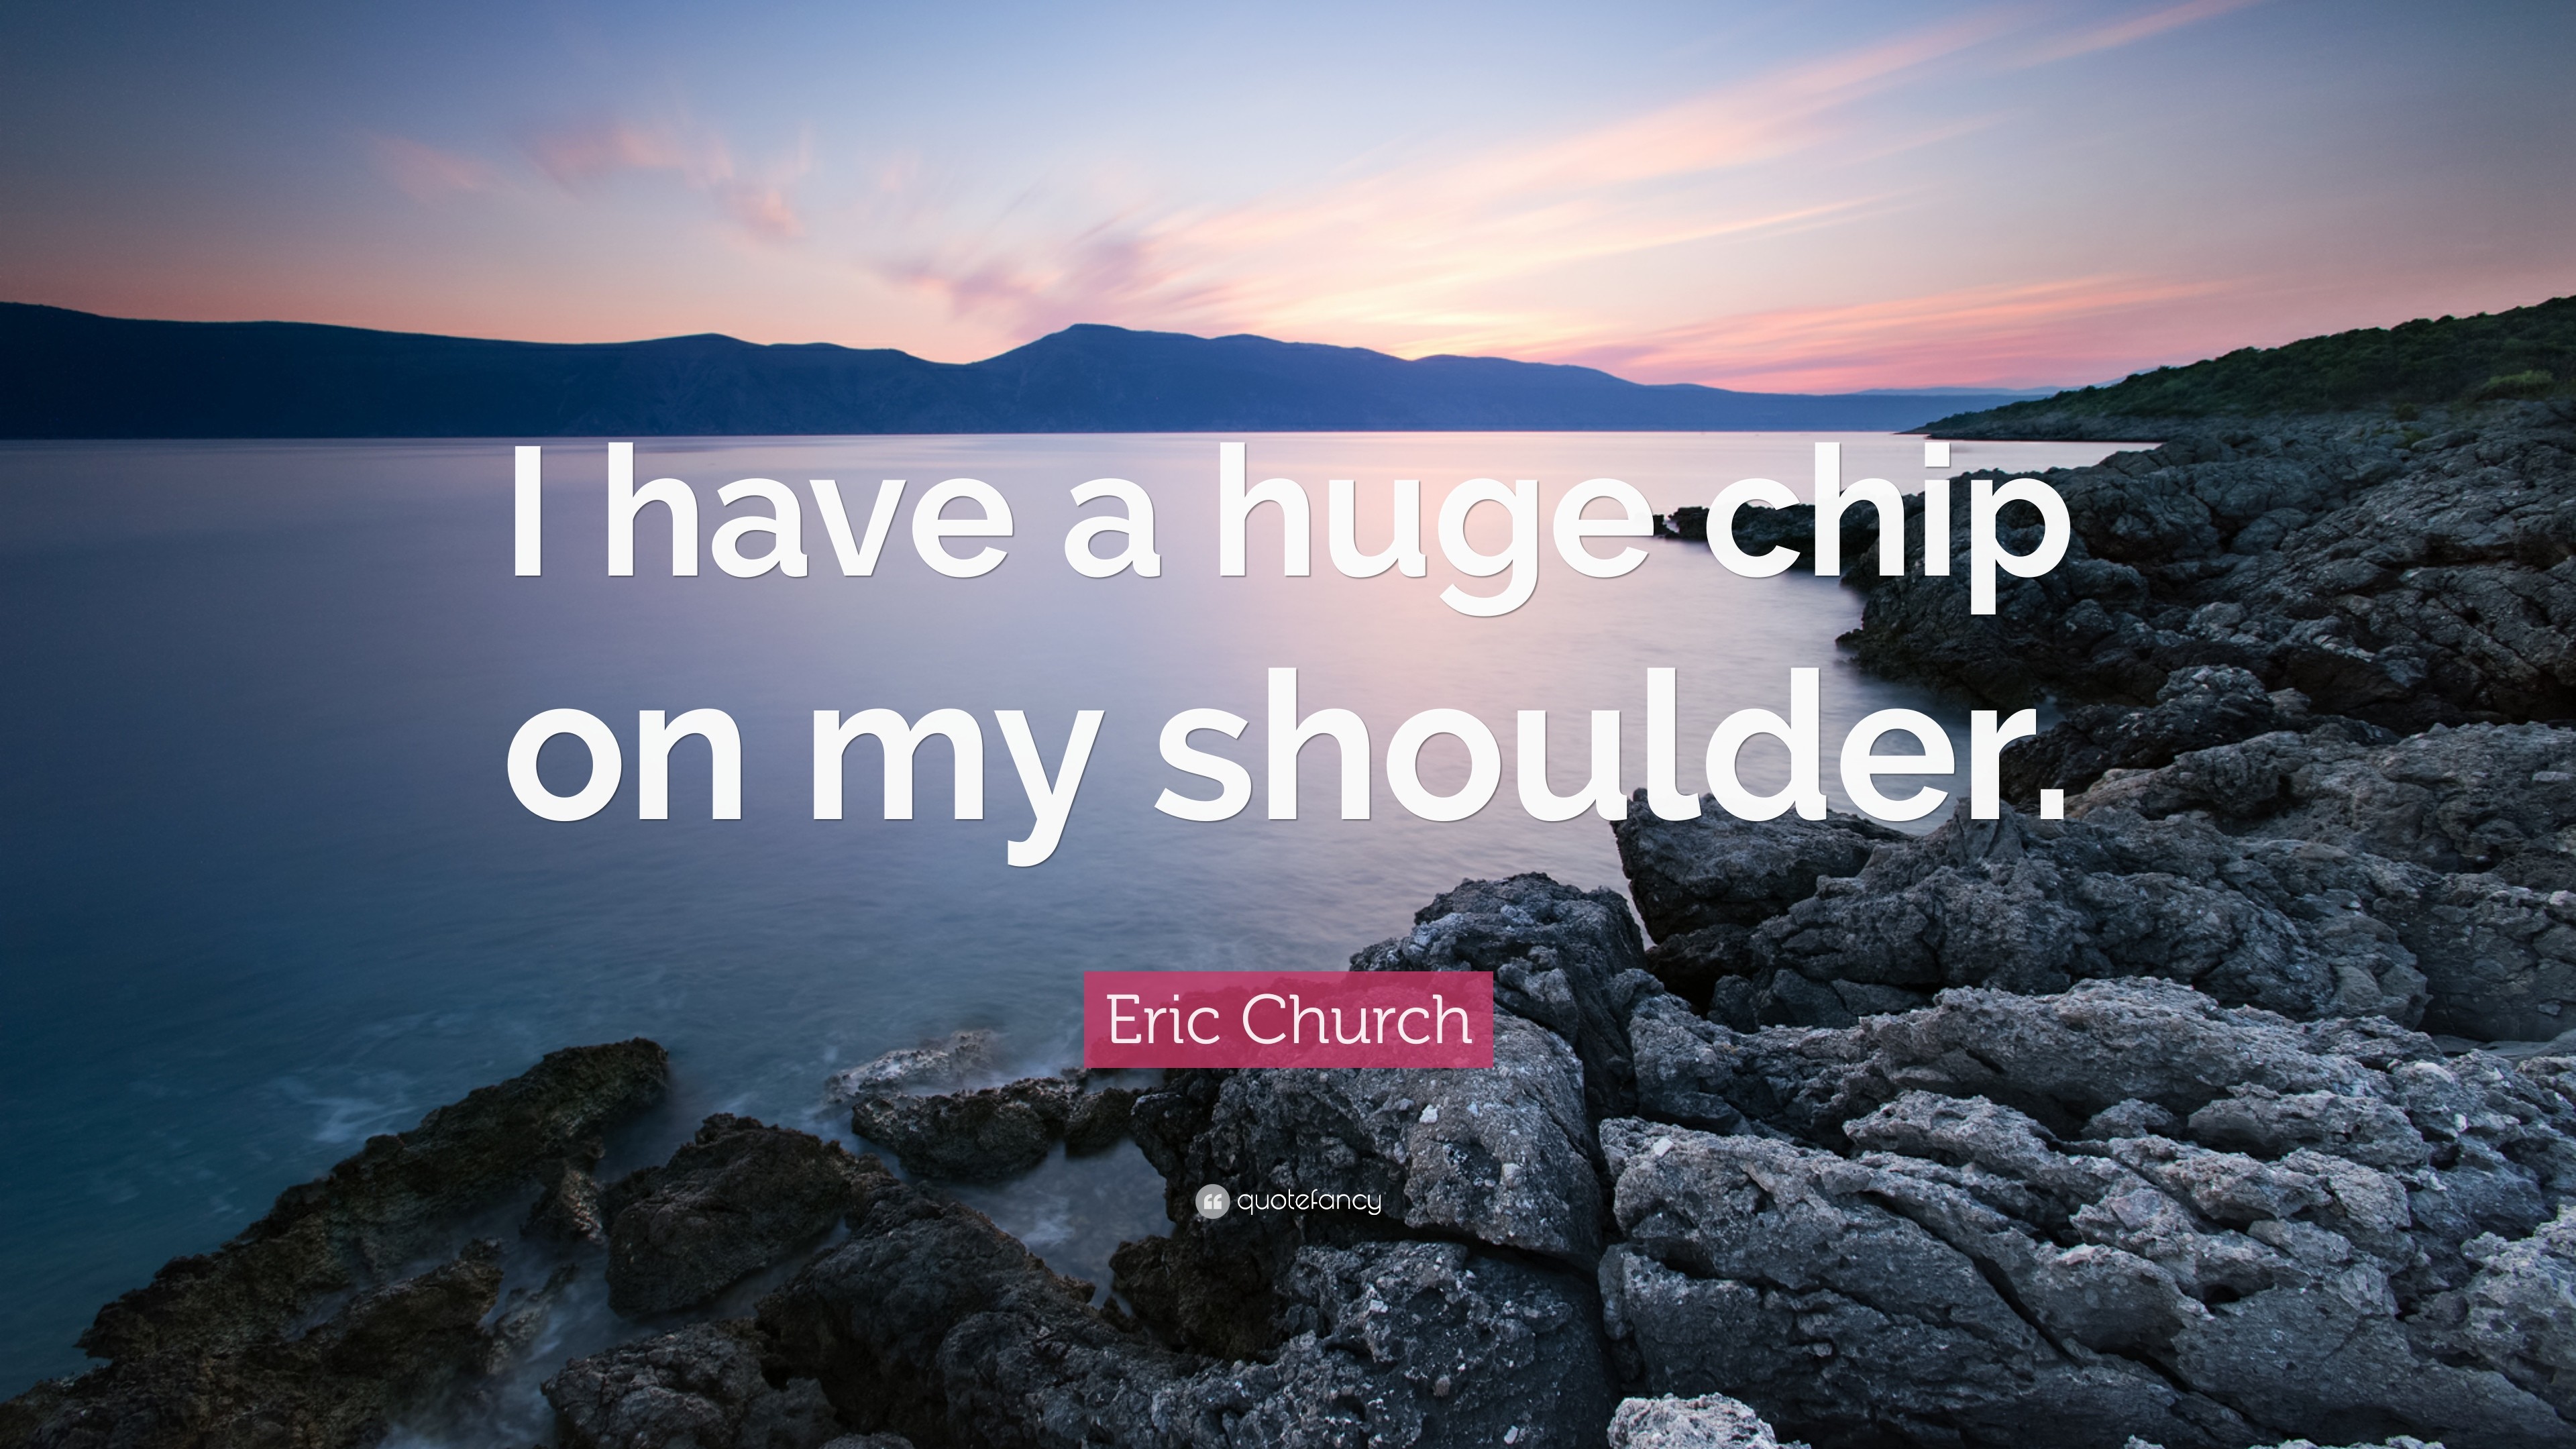 3840x2160 Eric Church Quote: “I have a huge chip on my shoulder.”